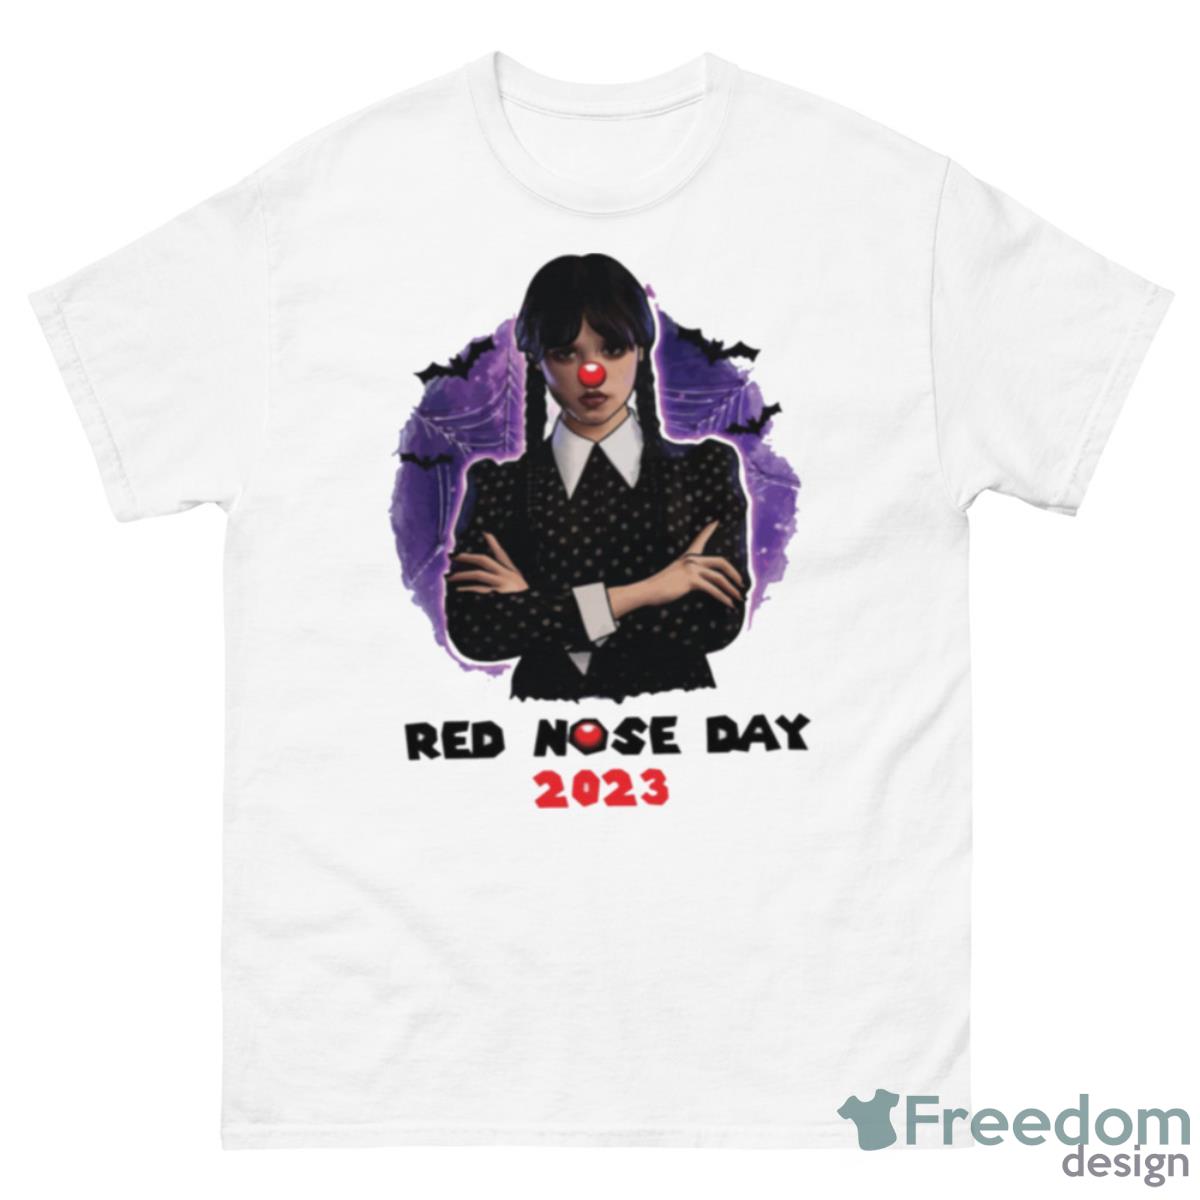 Red Nose Day 2023 Funny Scary Shirt - 500 Men’s Classic Tee Gildan